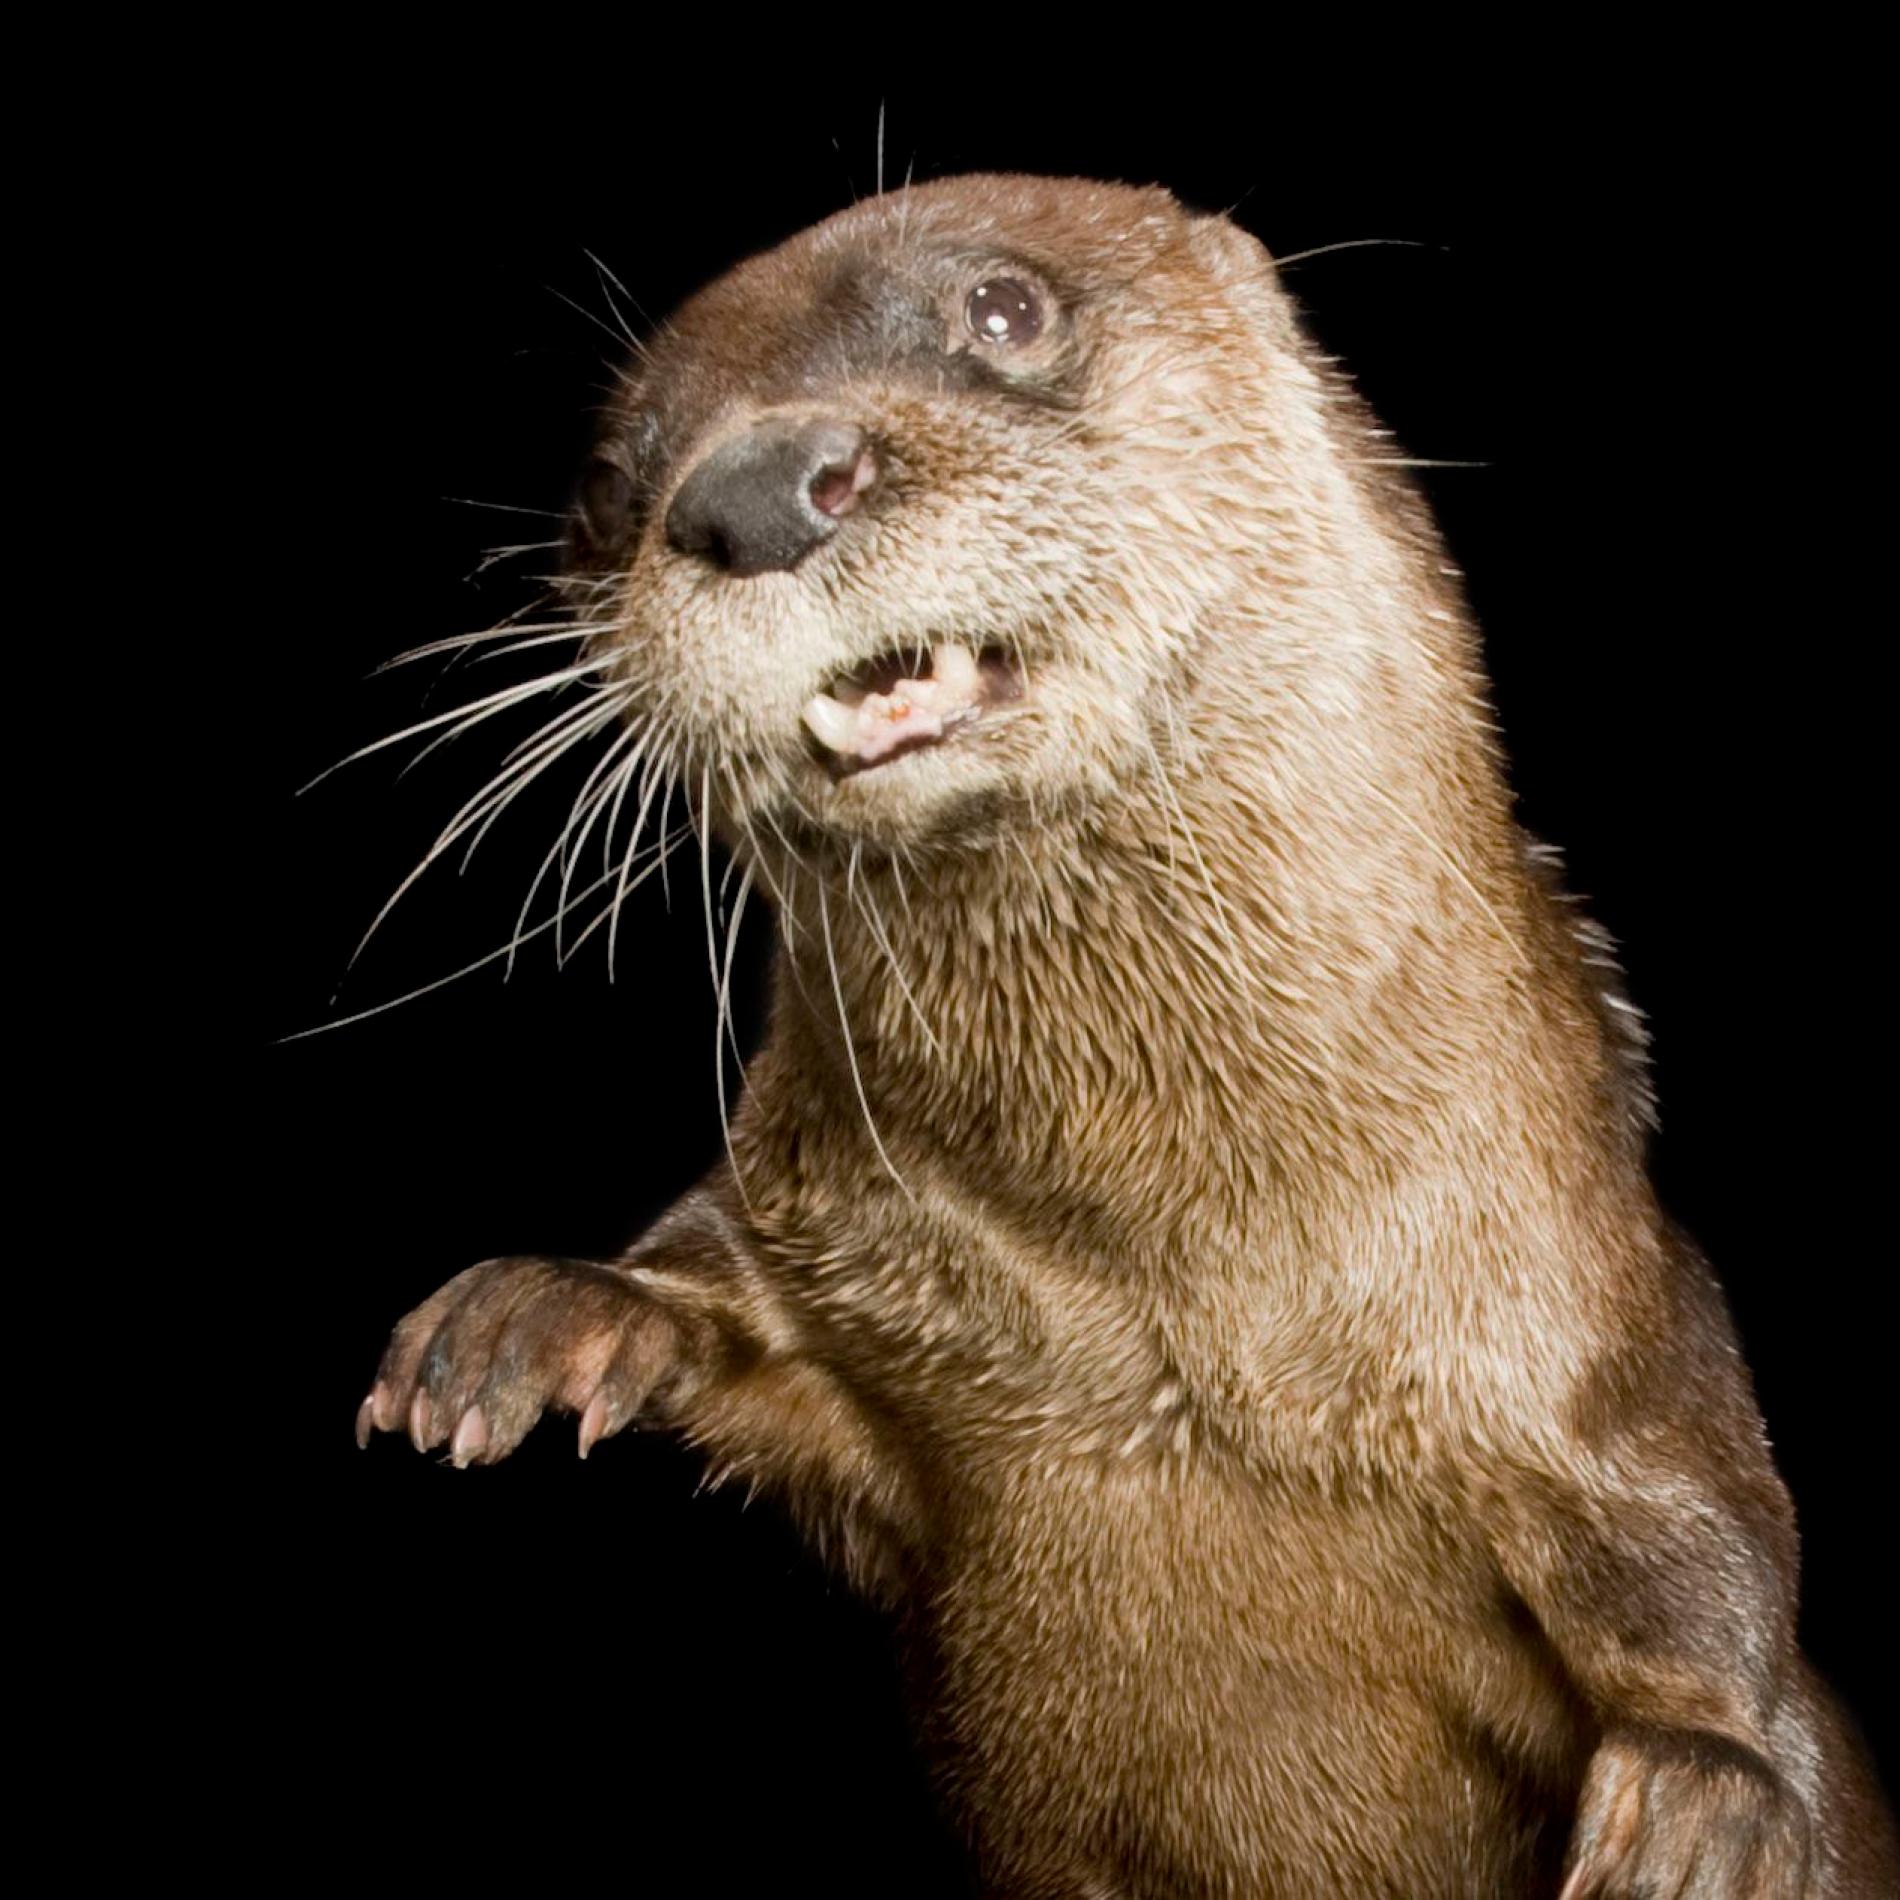 North American River Otter | National Geographic